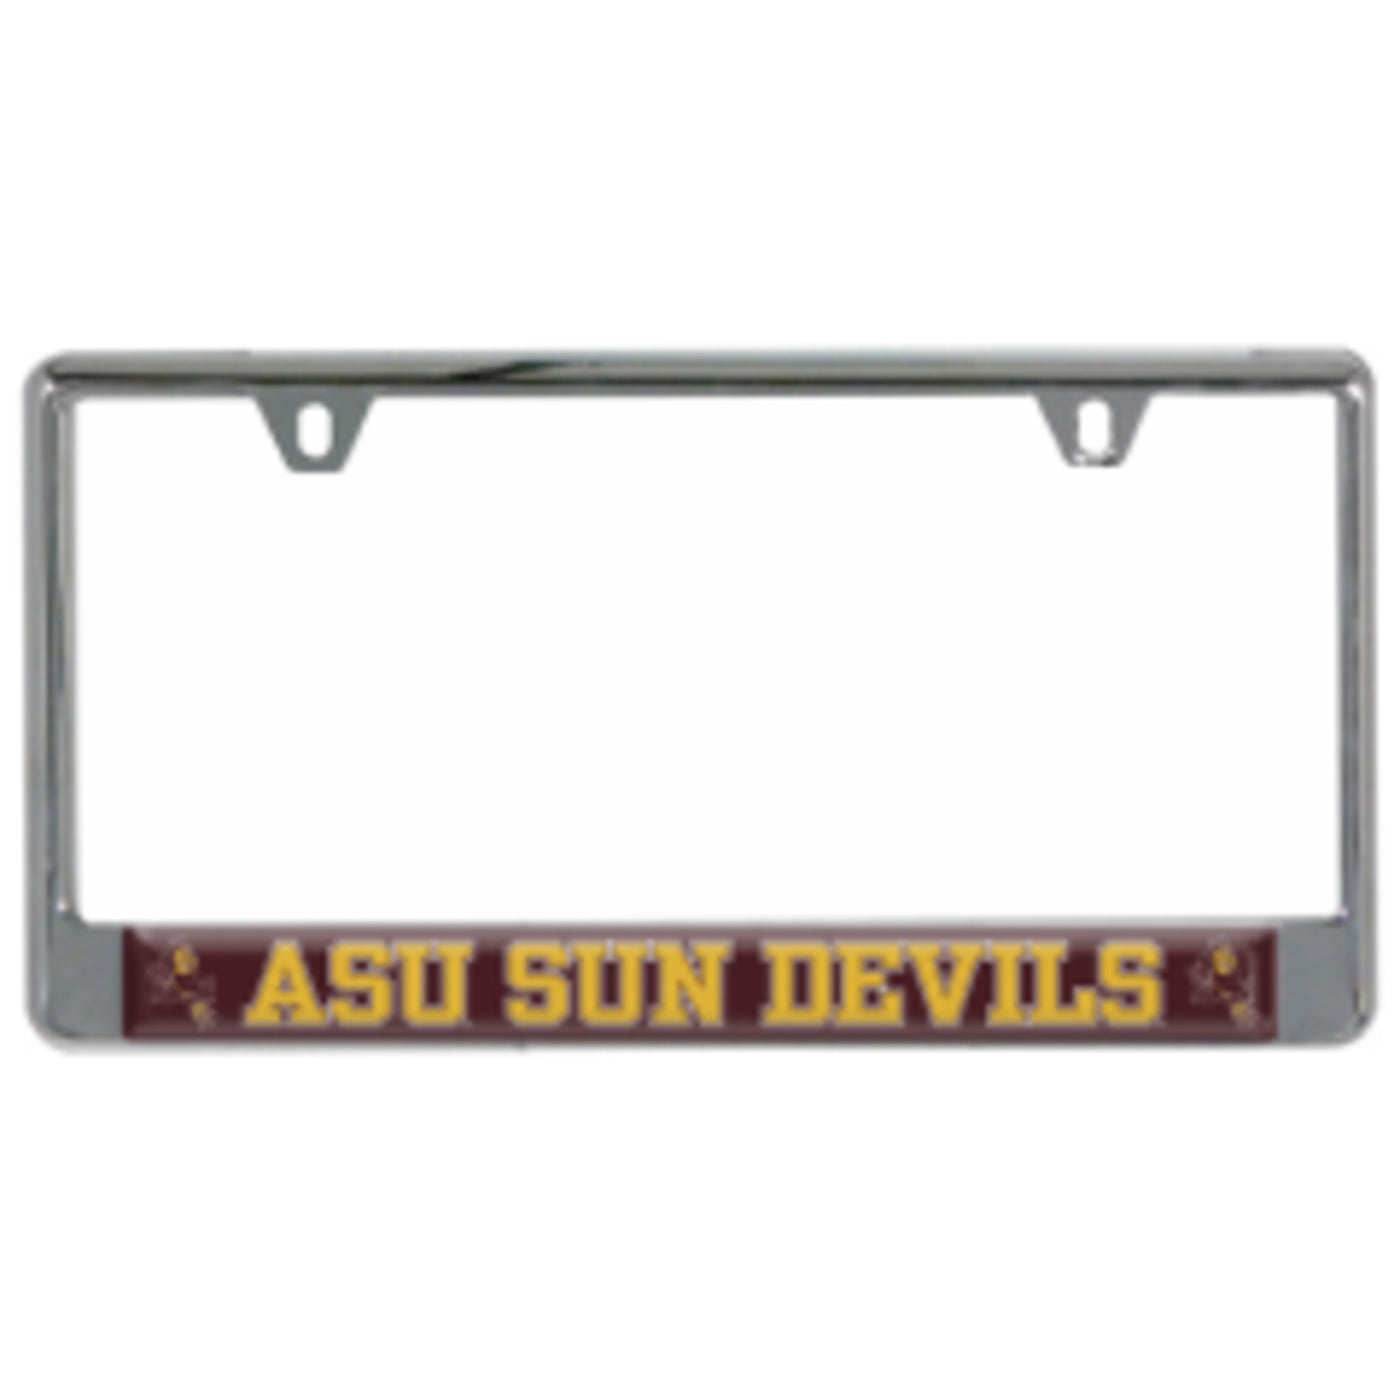 ASU license plate frame with maroon bar at bottom with 'ASu Sun Devils' lettering in between 2 Sparkys